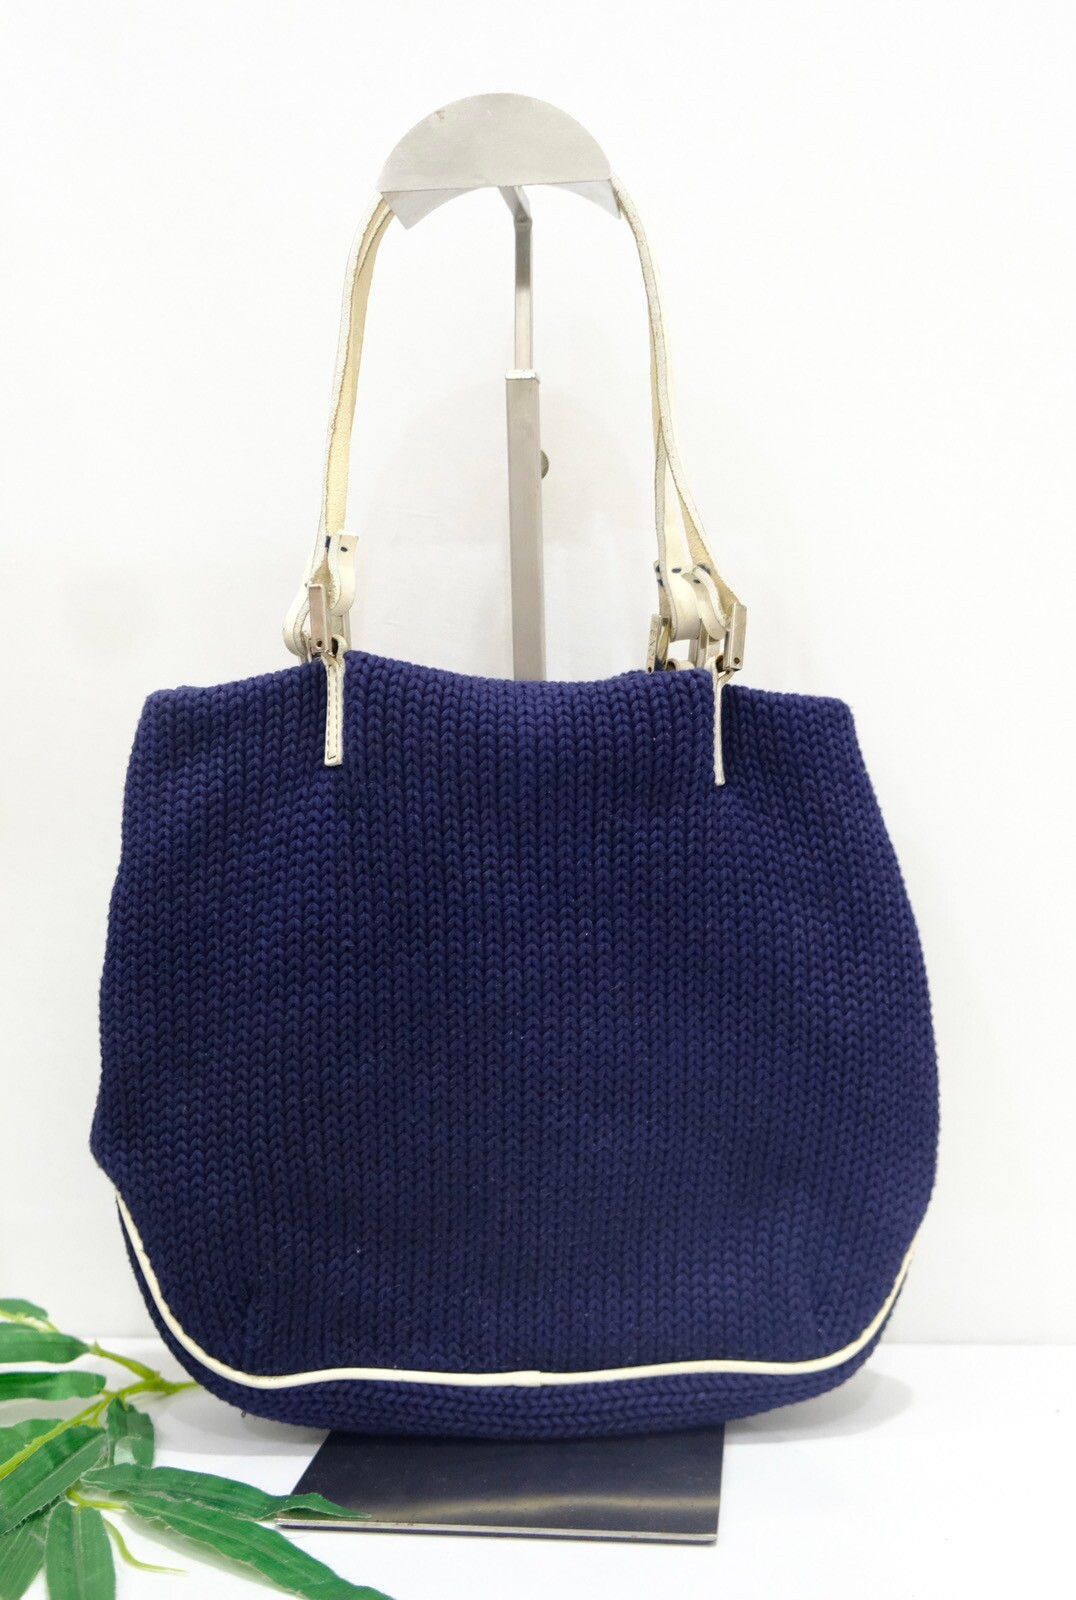 Authentic vintage Fendi navy knitted tote bag - 3